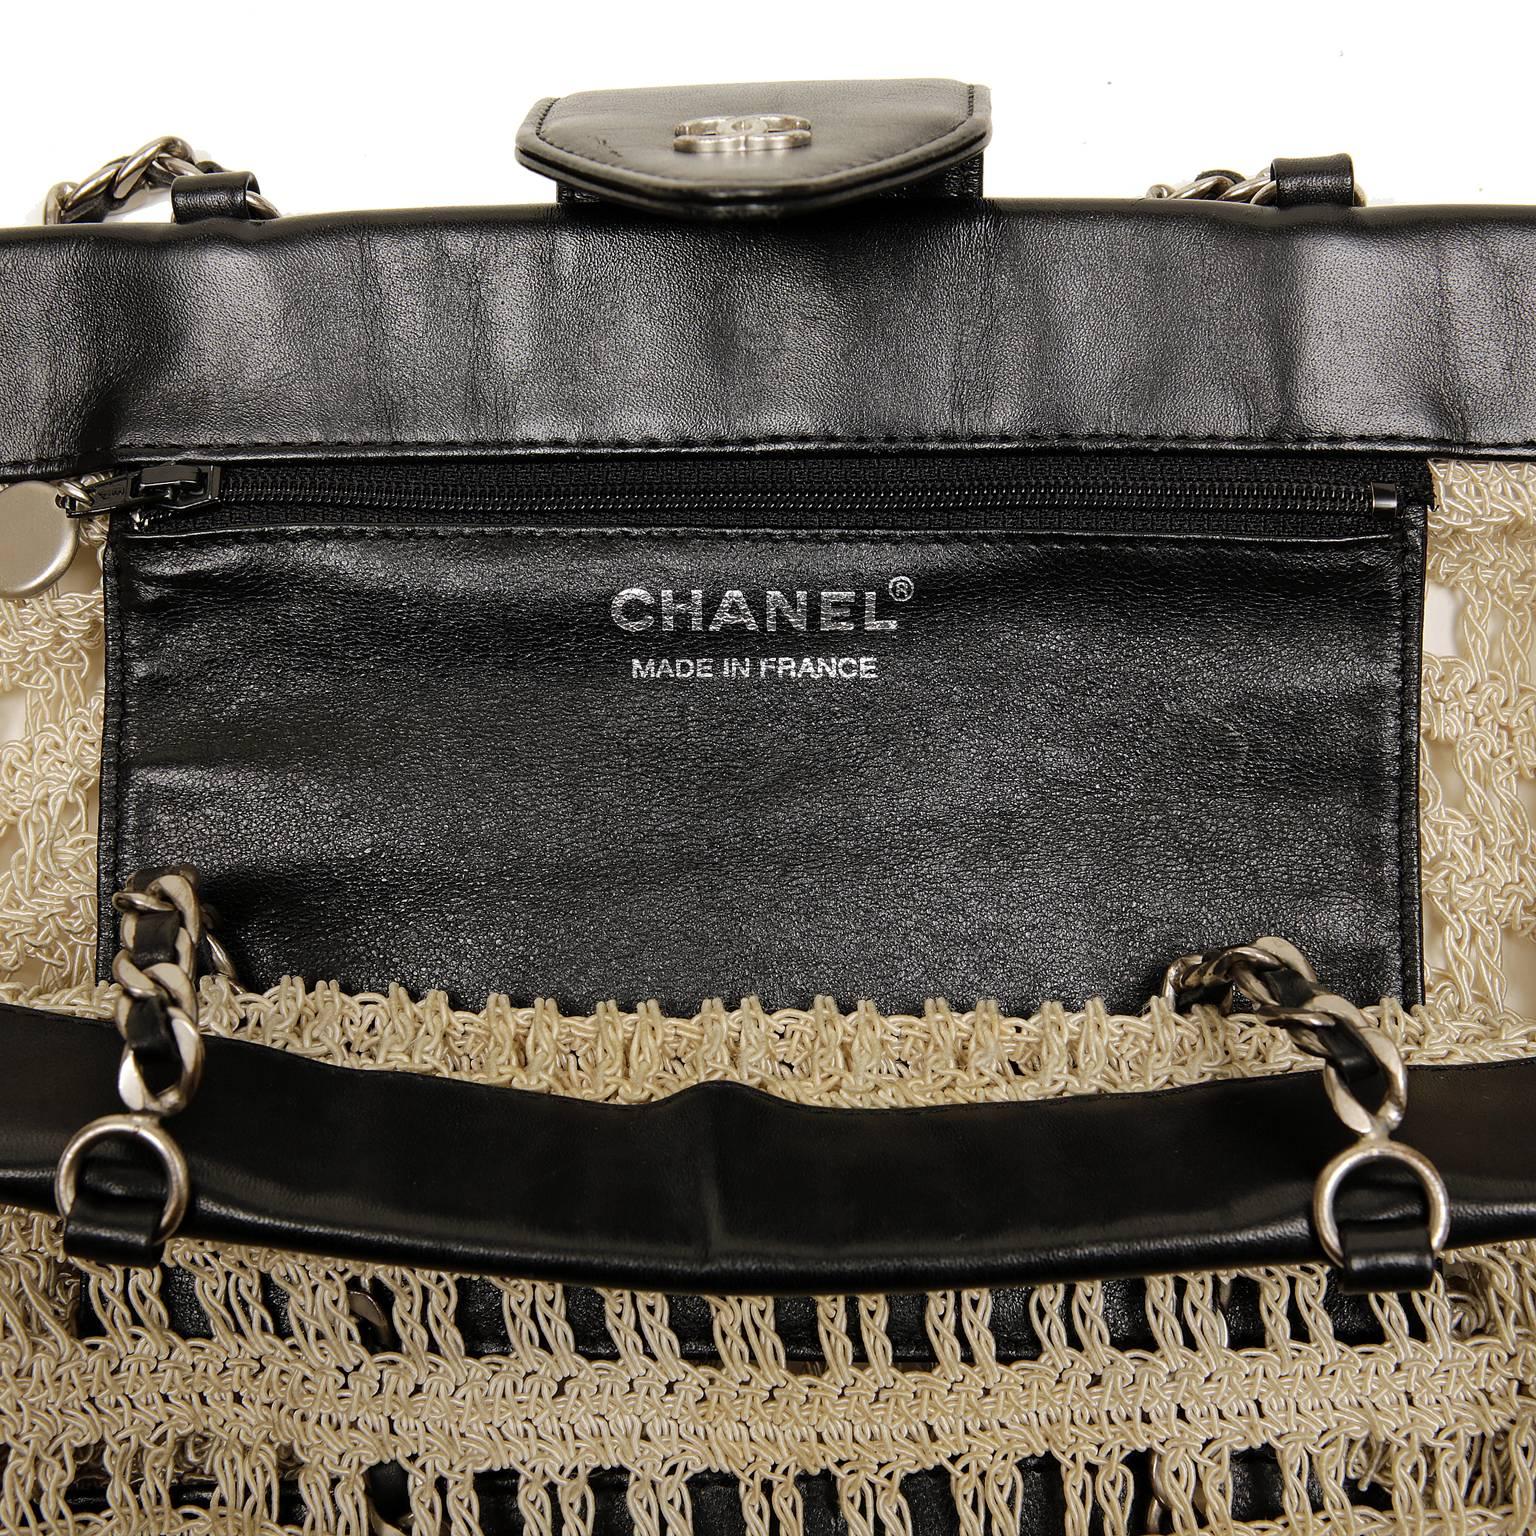 Chanel Beige Crocheted and Black Leather Tote Bag For Sale 4